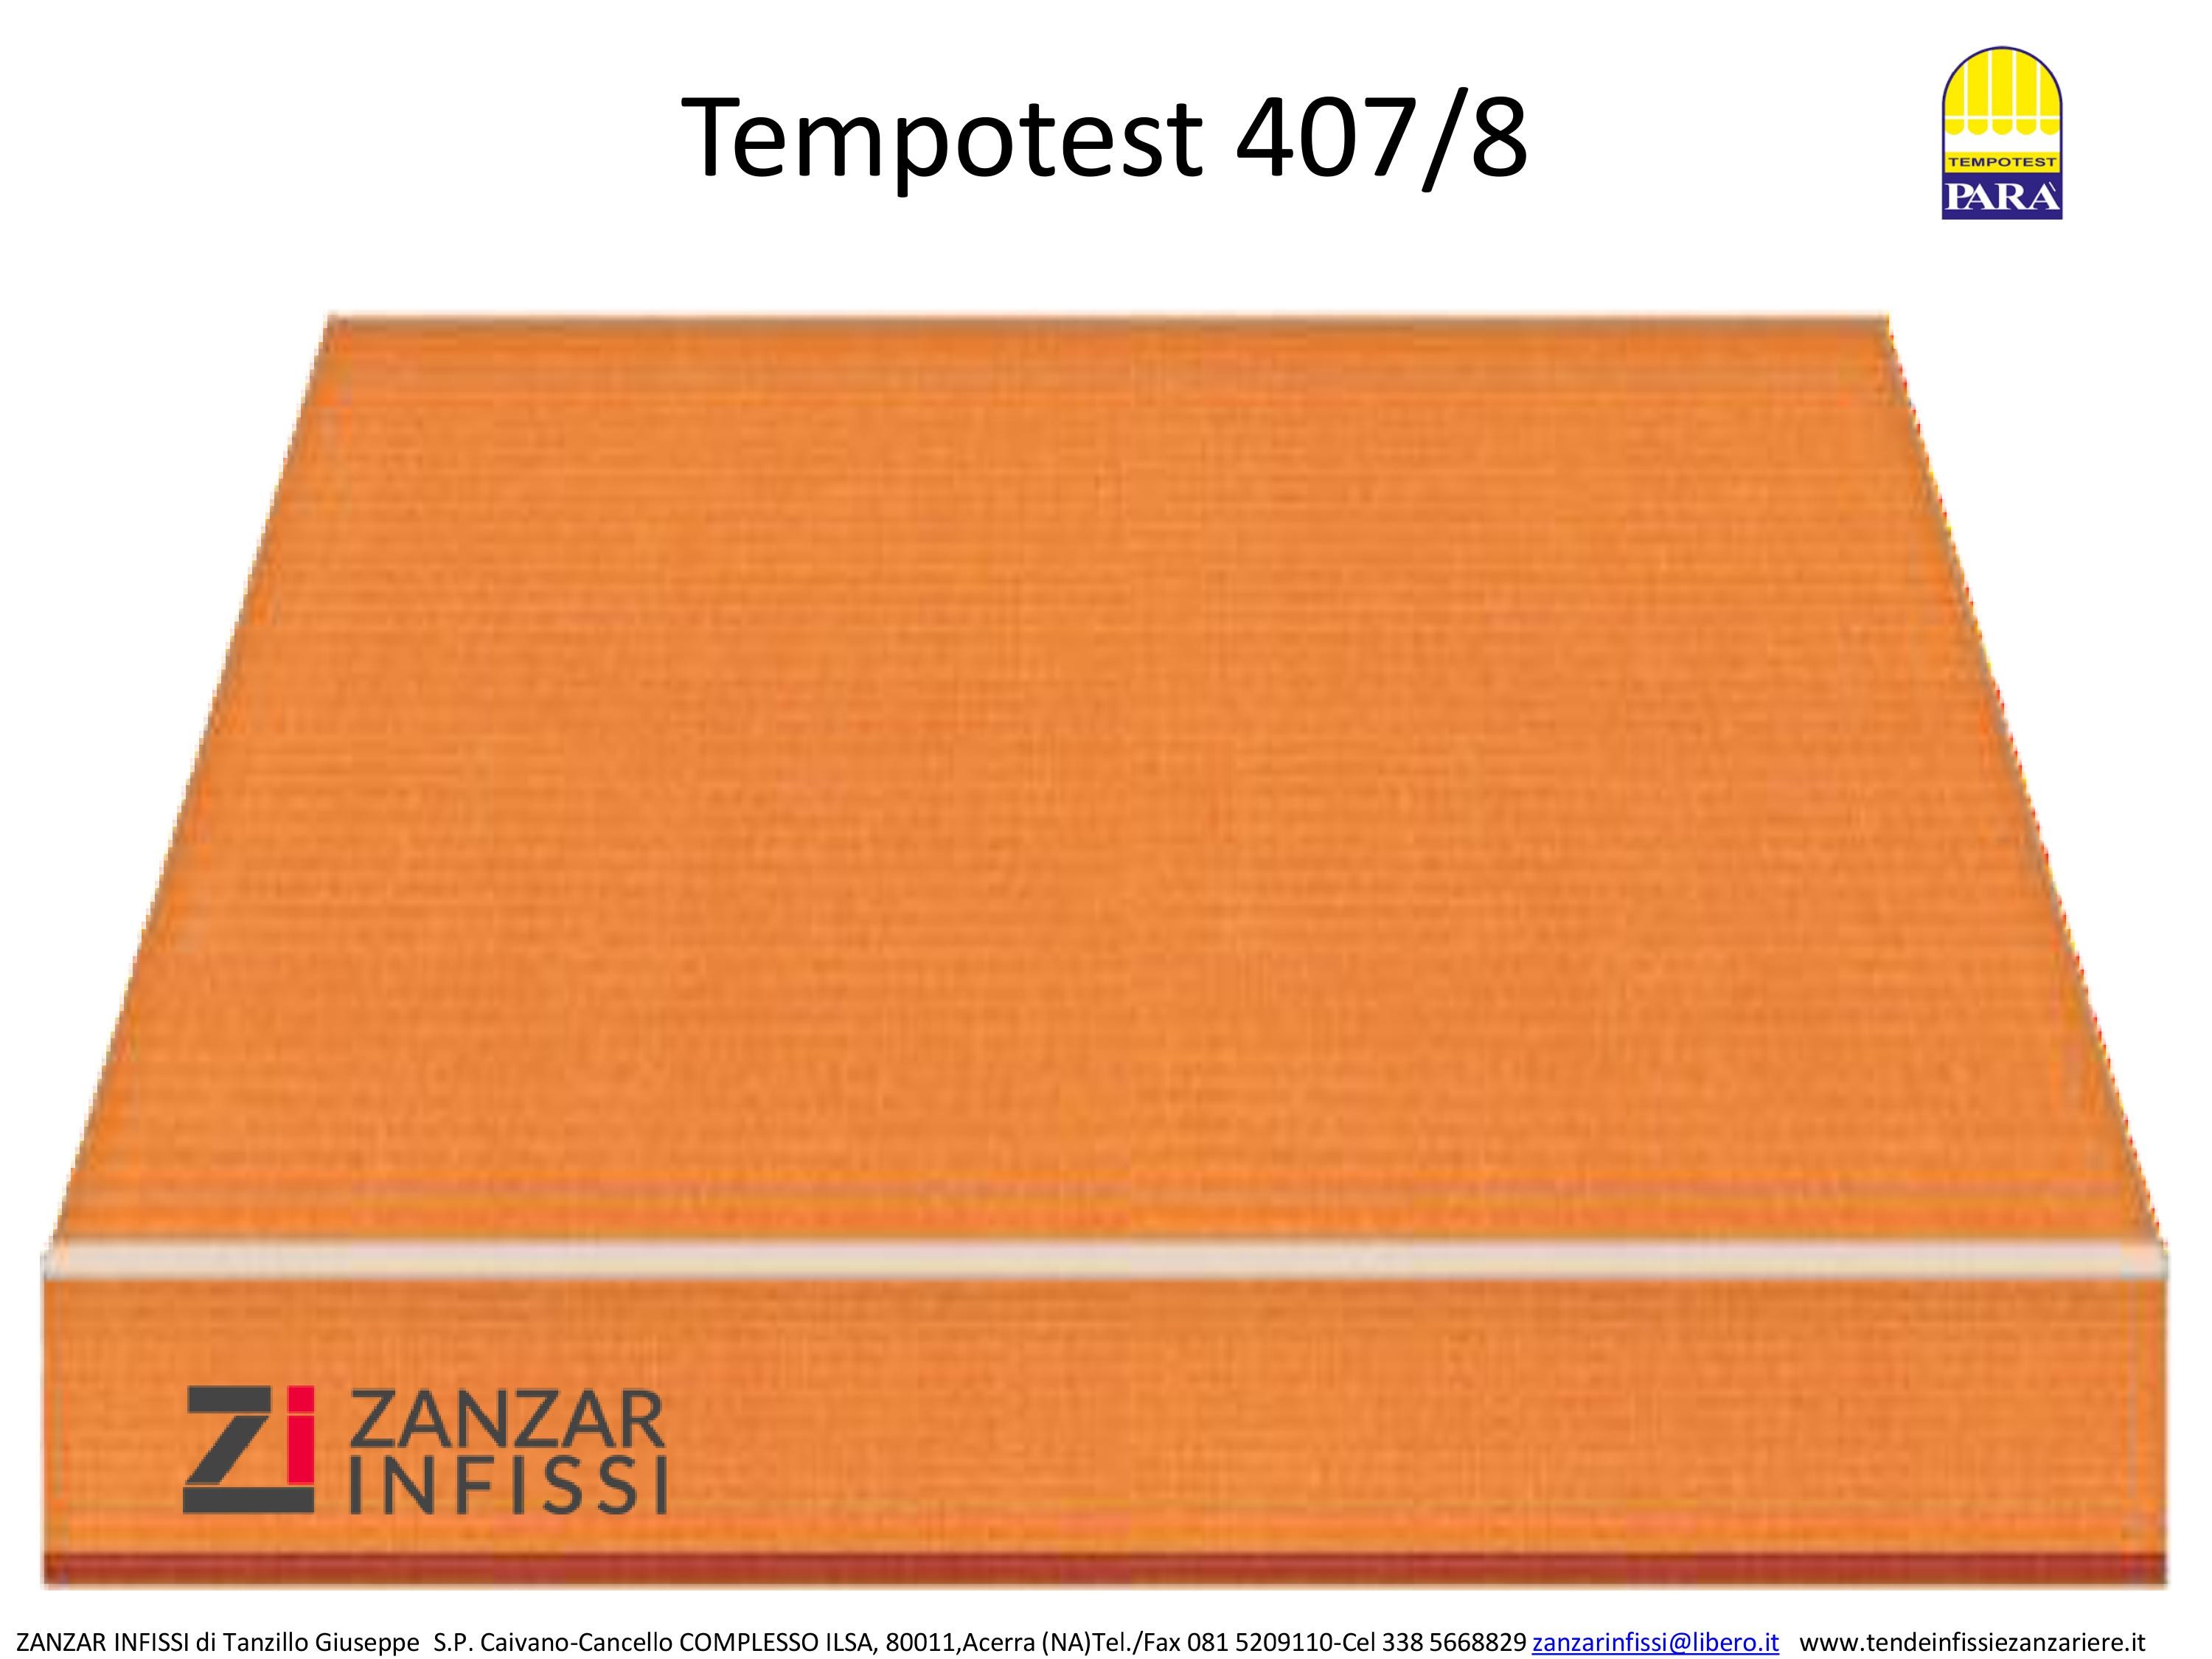 Tempotest 407/8